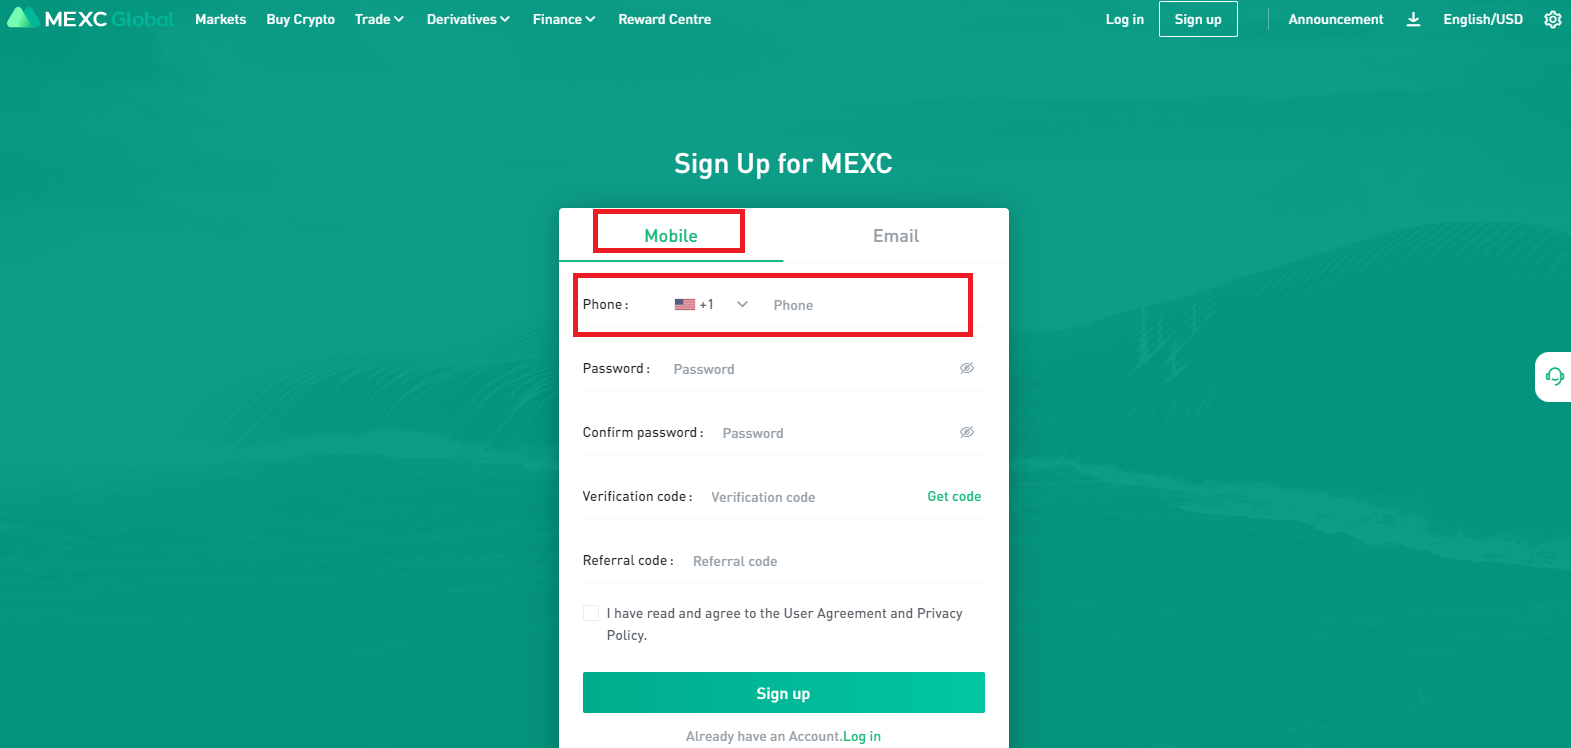 How to Open Account and Withdraw at MEXC